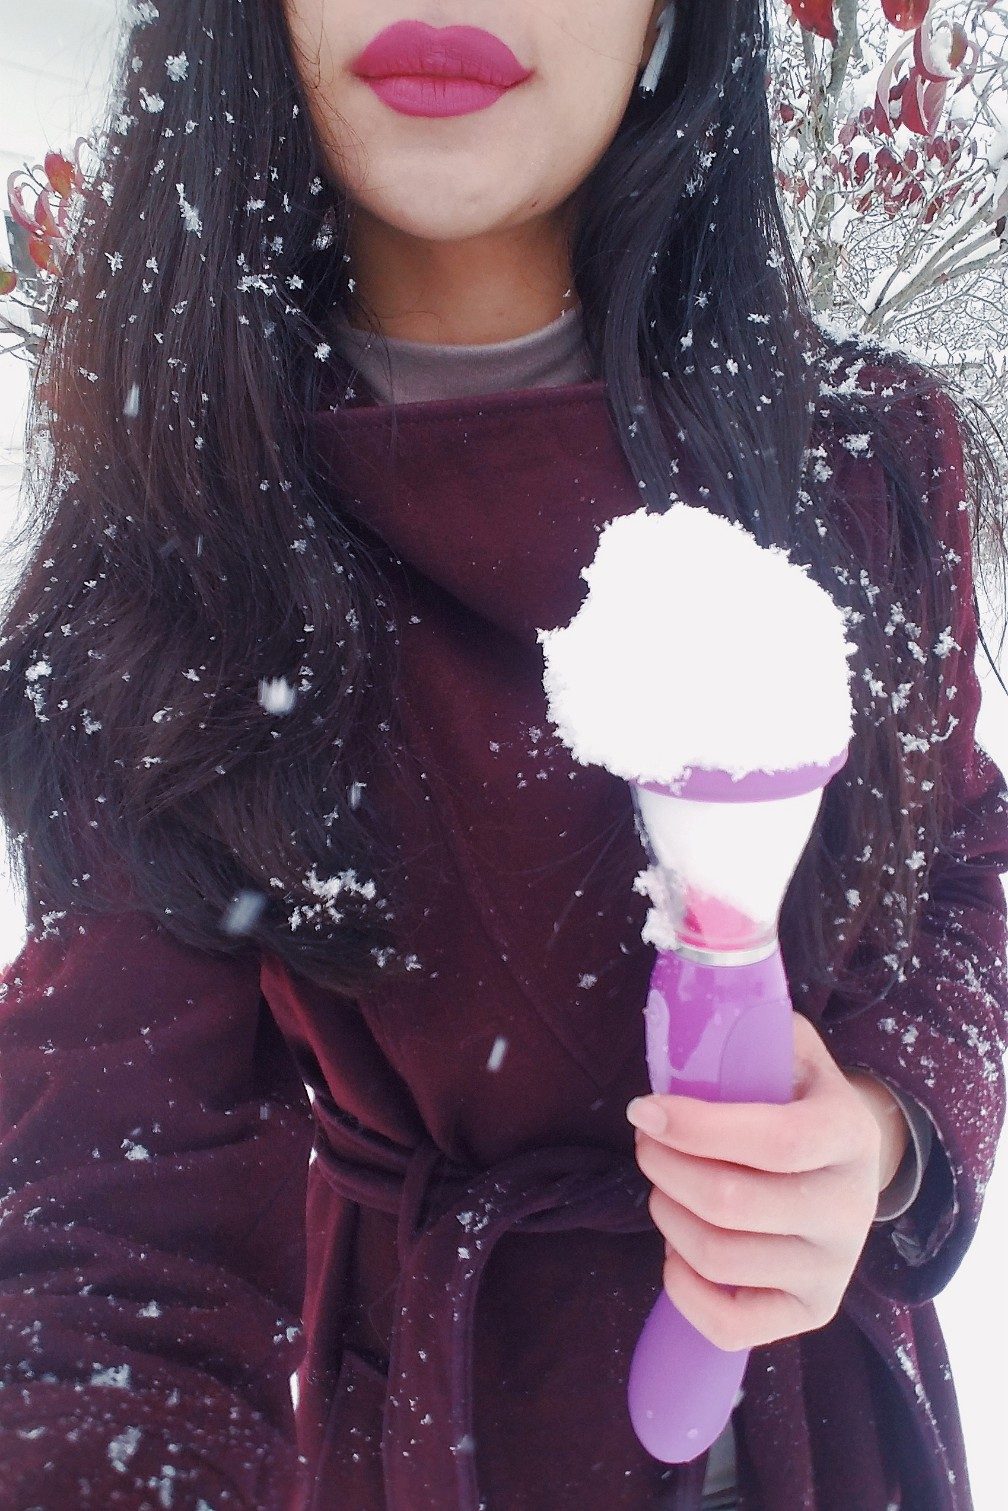 [Image: girl with long black hair holding the insertable handle and using the Fantasy For Her Ultimate Pleasure's suction cup attachment to hold a snow cone outside.[/note]